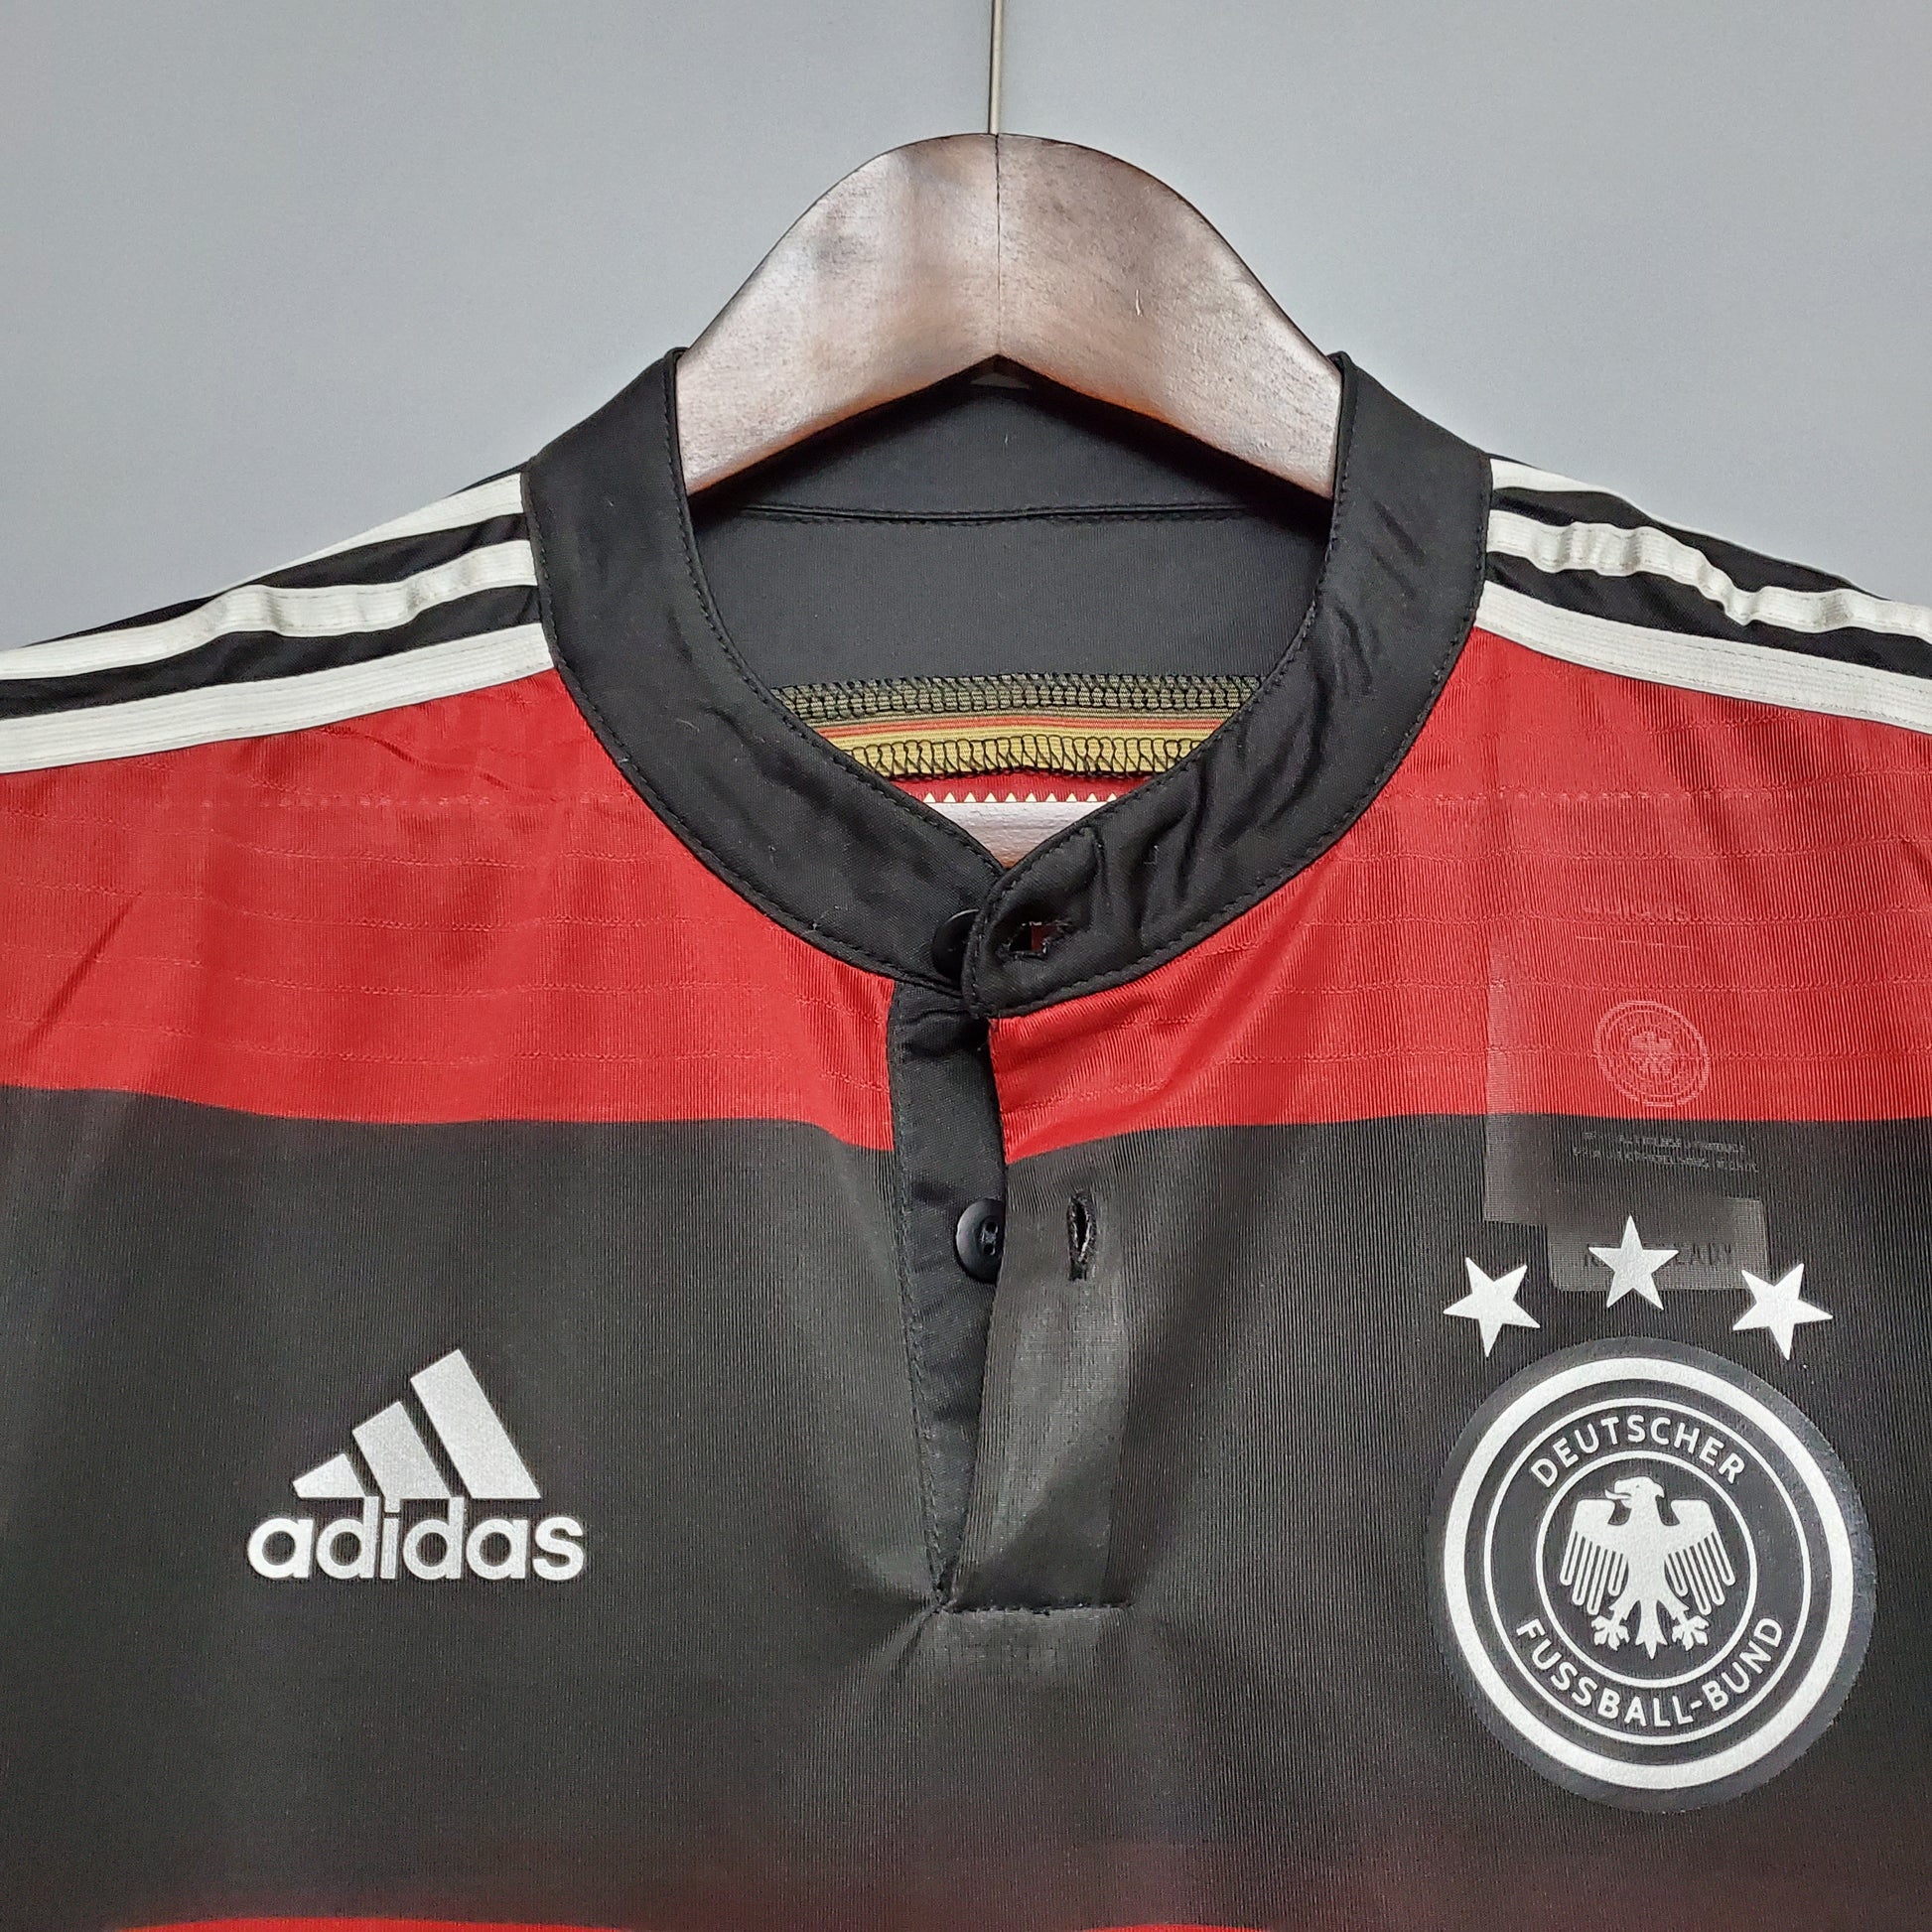 2014 GERMANY FIFA WORLD CUP CHAMPIONS ADIDAS JERSEY MEN'S SIZE 2XL BRAND NEW